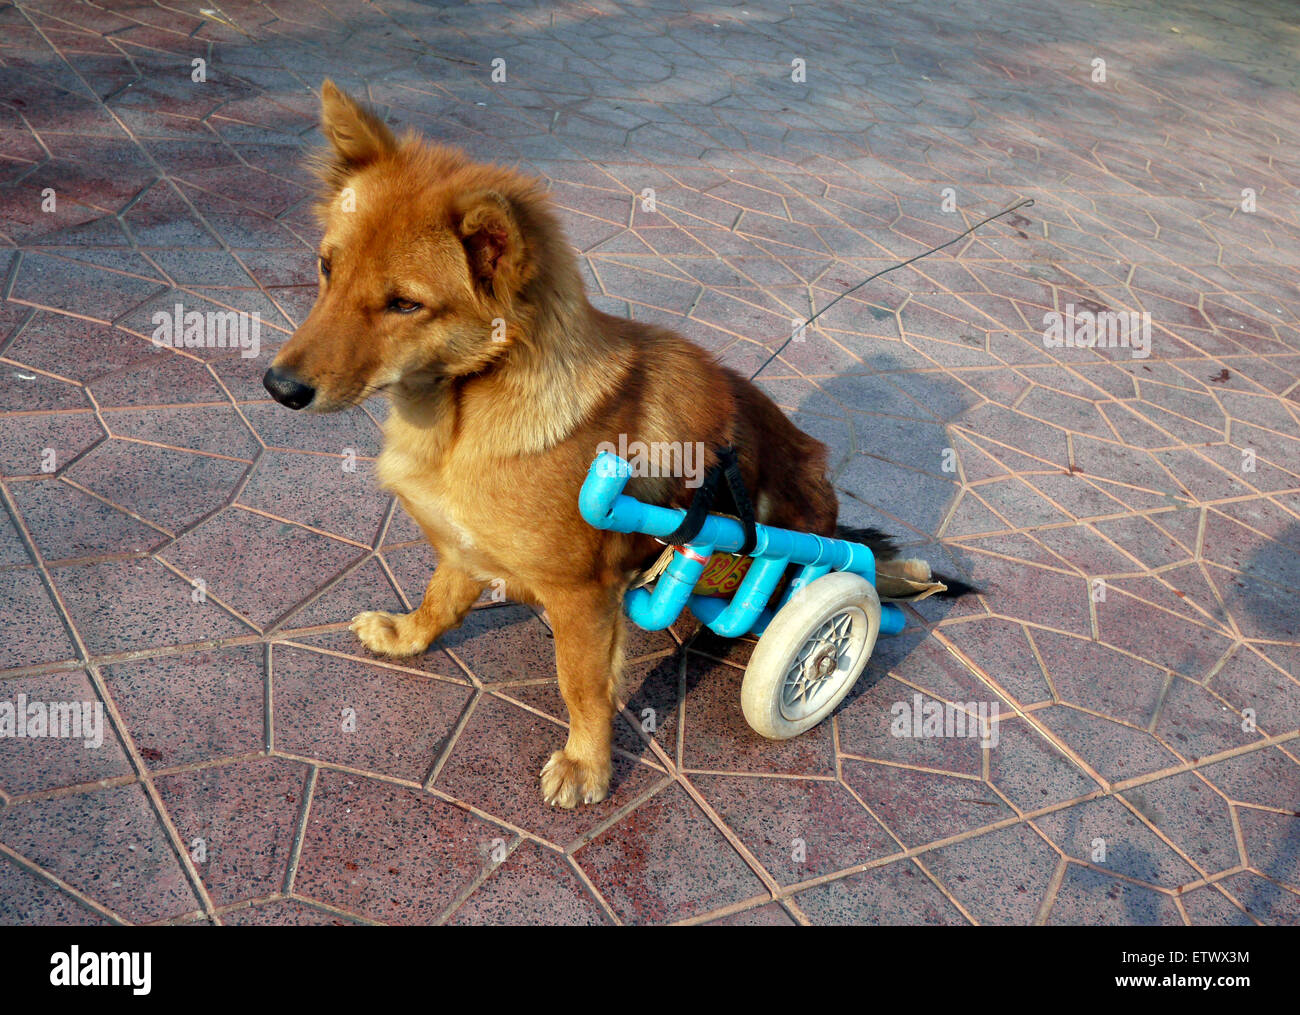 Paralyzed domestic dog with back wheels for legs to aid mobility Stock Photo